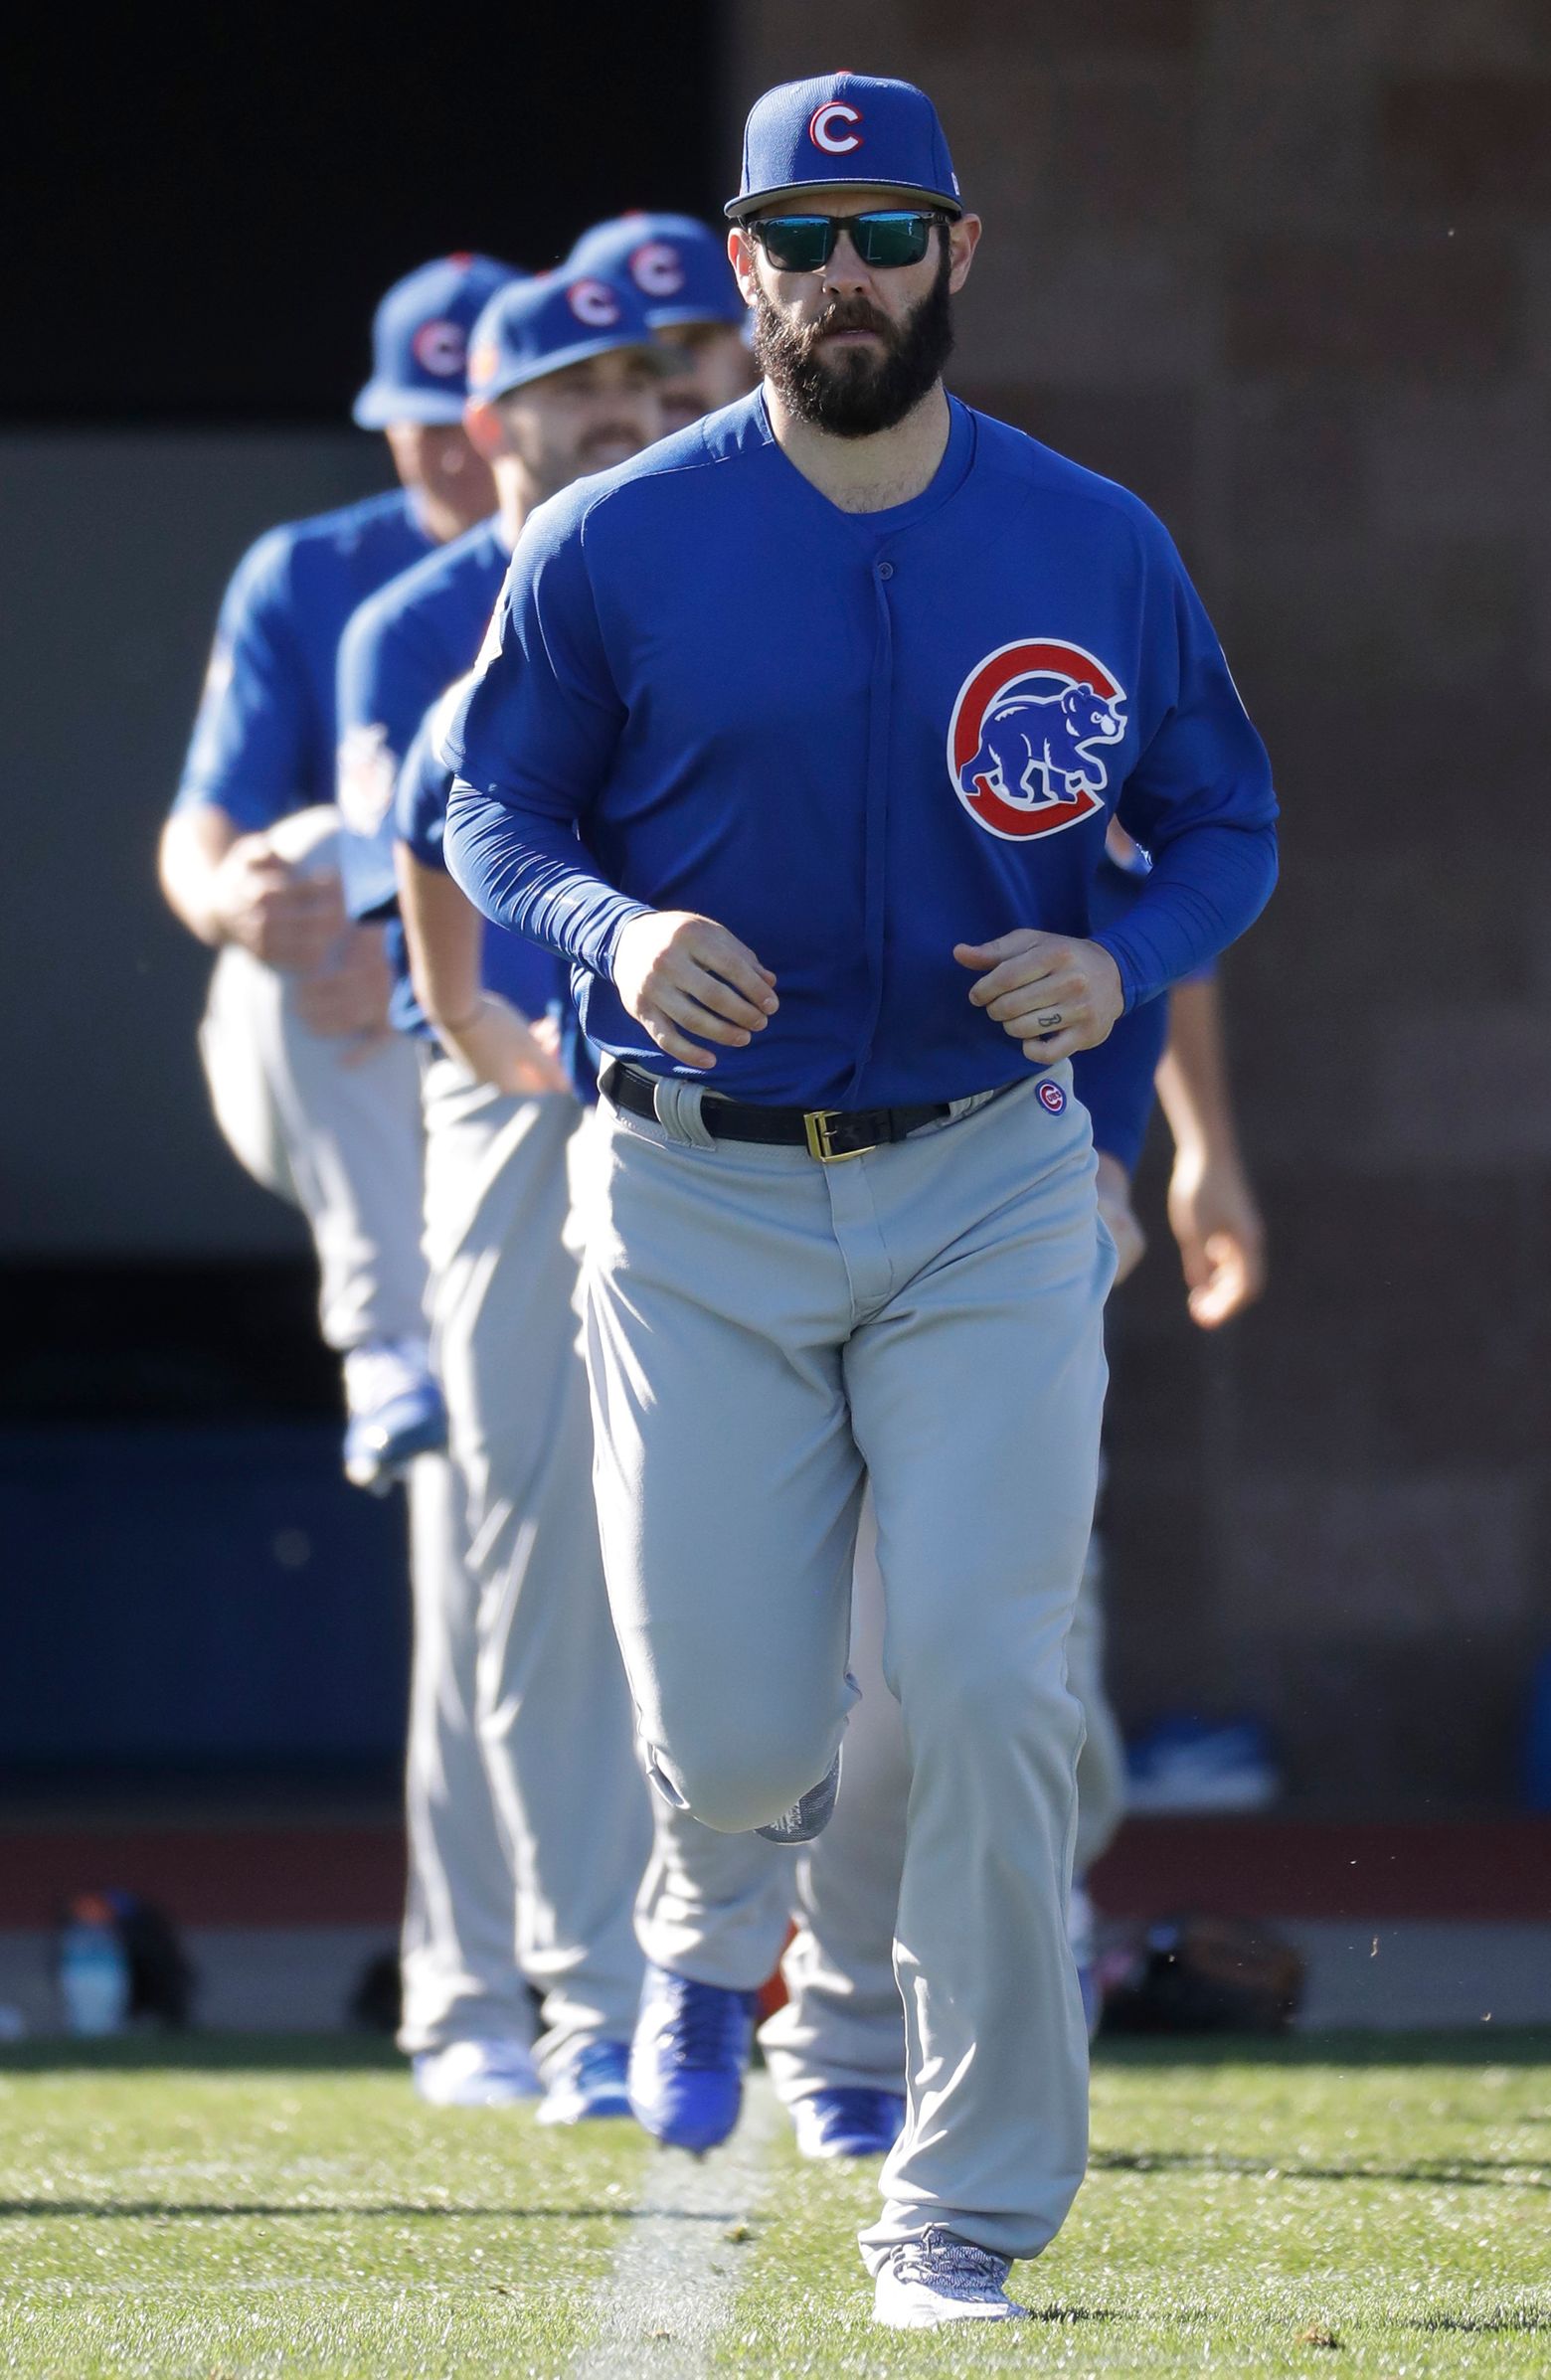 Arrieta hopeful of landing new contract to stay with Cubs